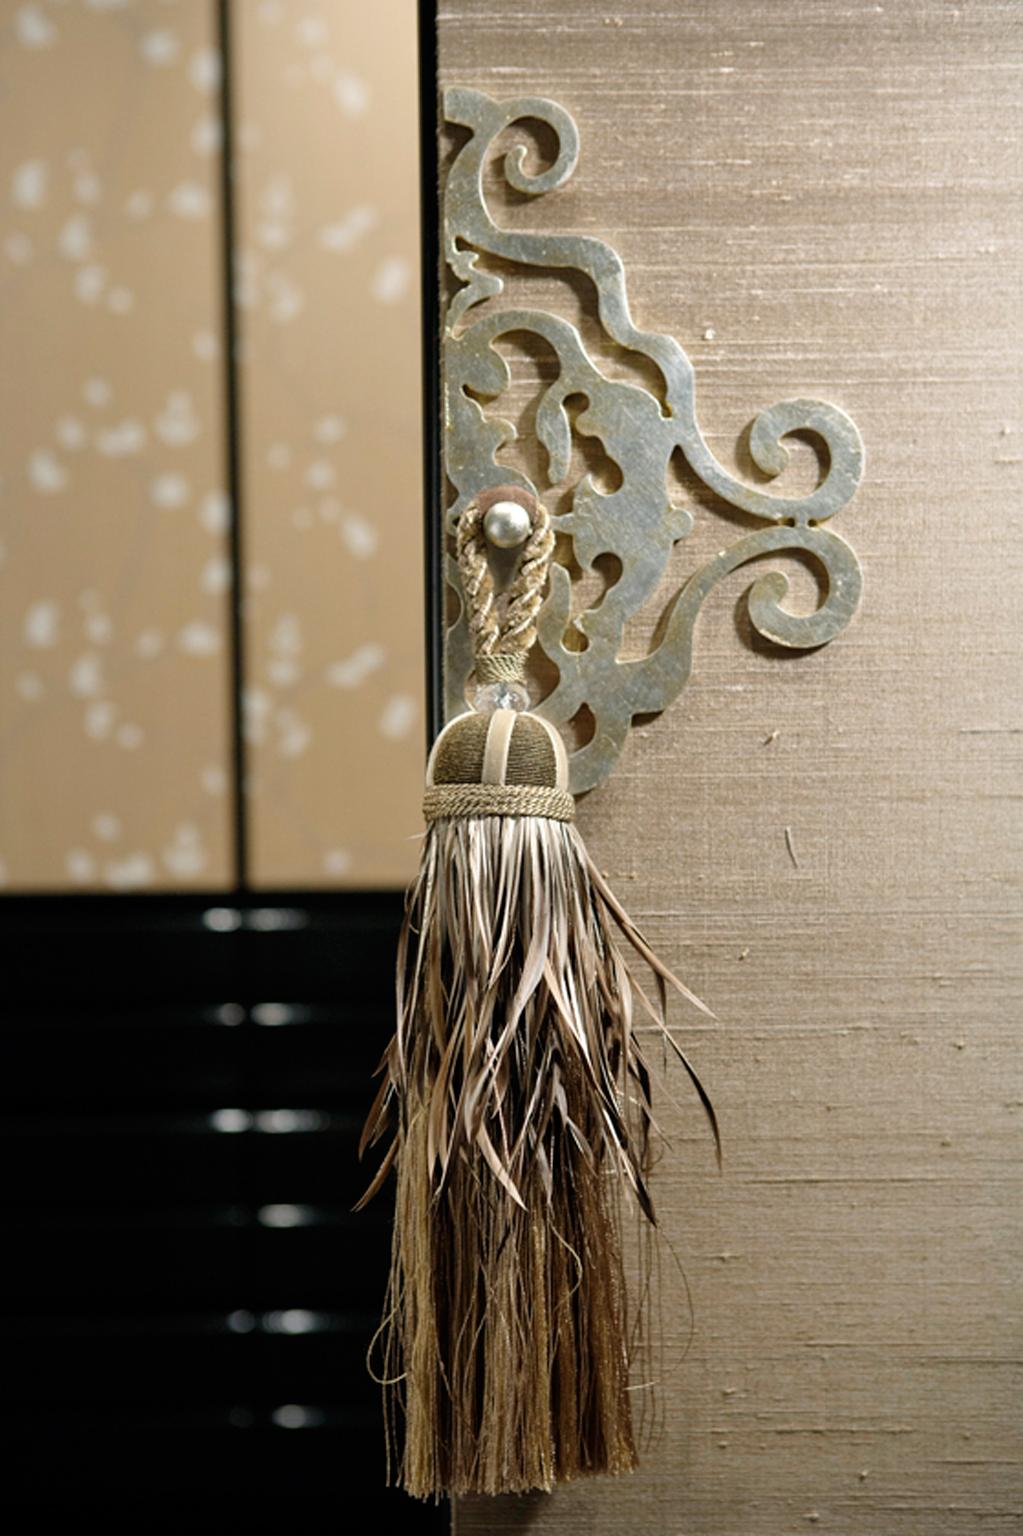 This is a pair of glamorous curtains tassels to enrich every curtains made in pure silk and faux feathers.
They have a neutral bronze tone, with bright touch of the crystal and details in copper color.